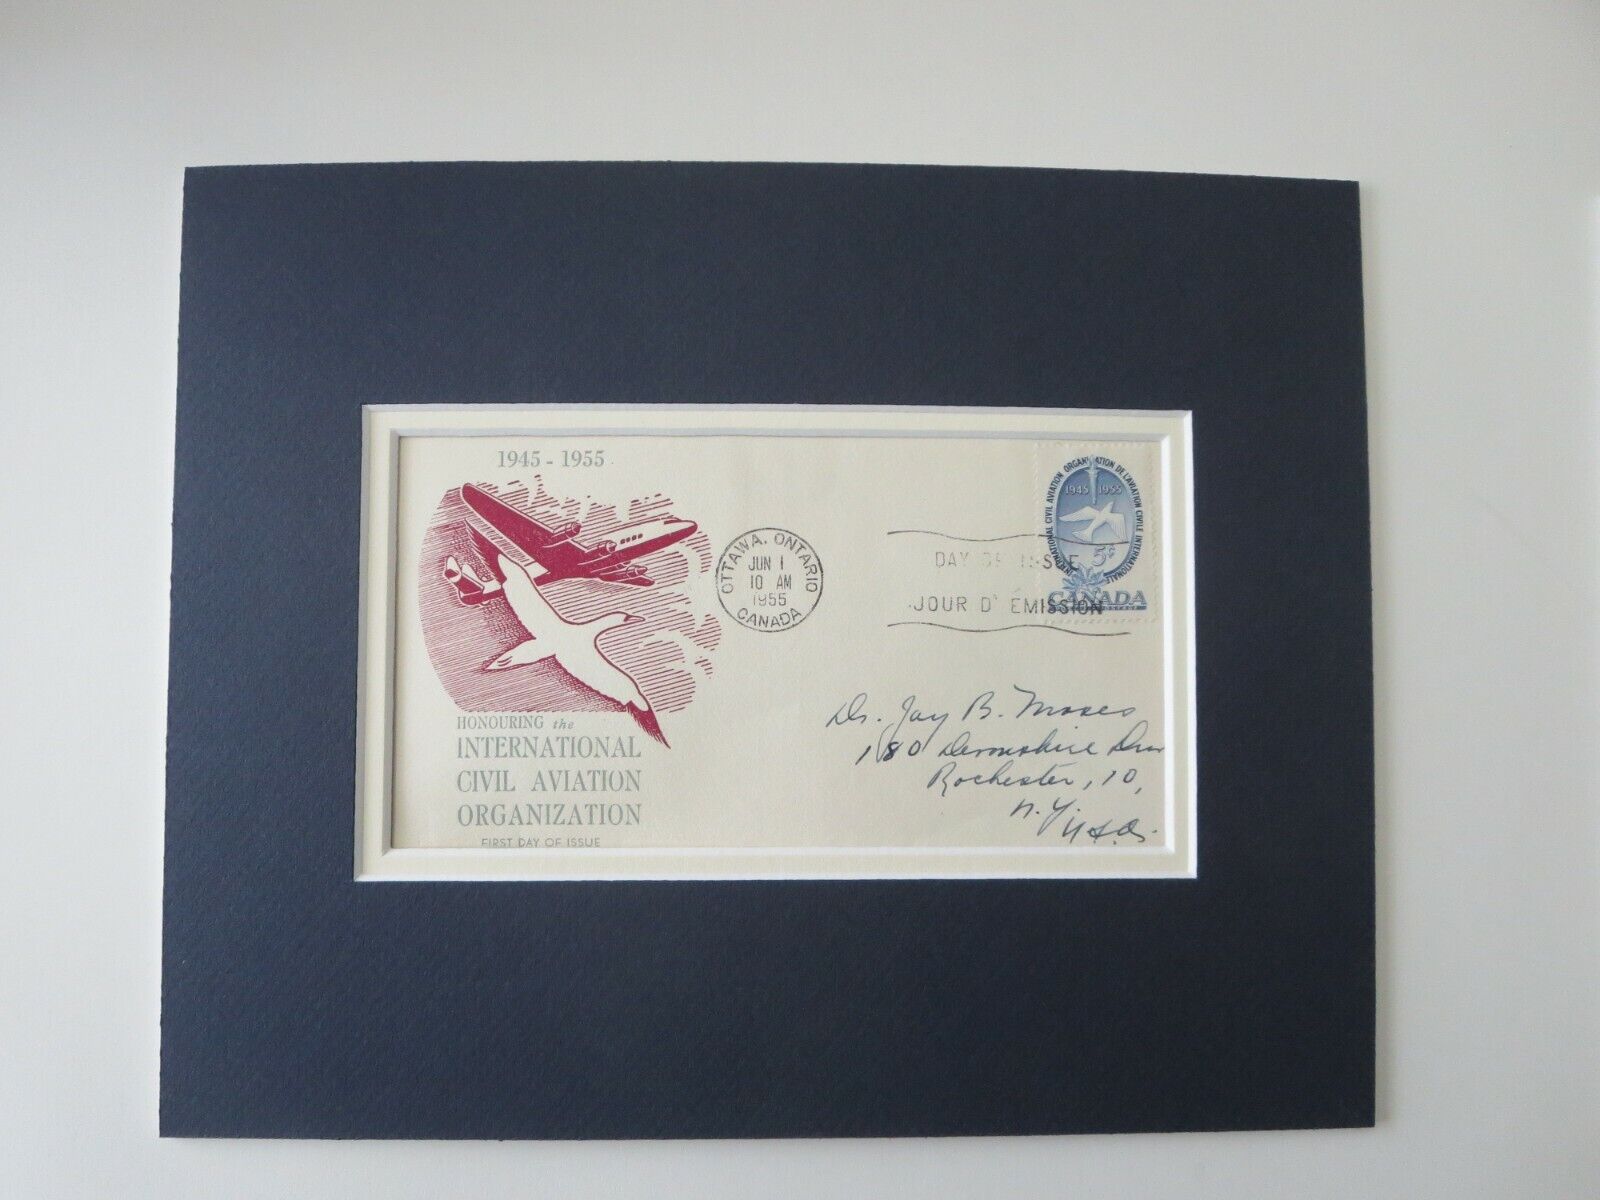 The International Civil Aviation Organization & First Day Cover of its own stamp